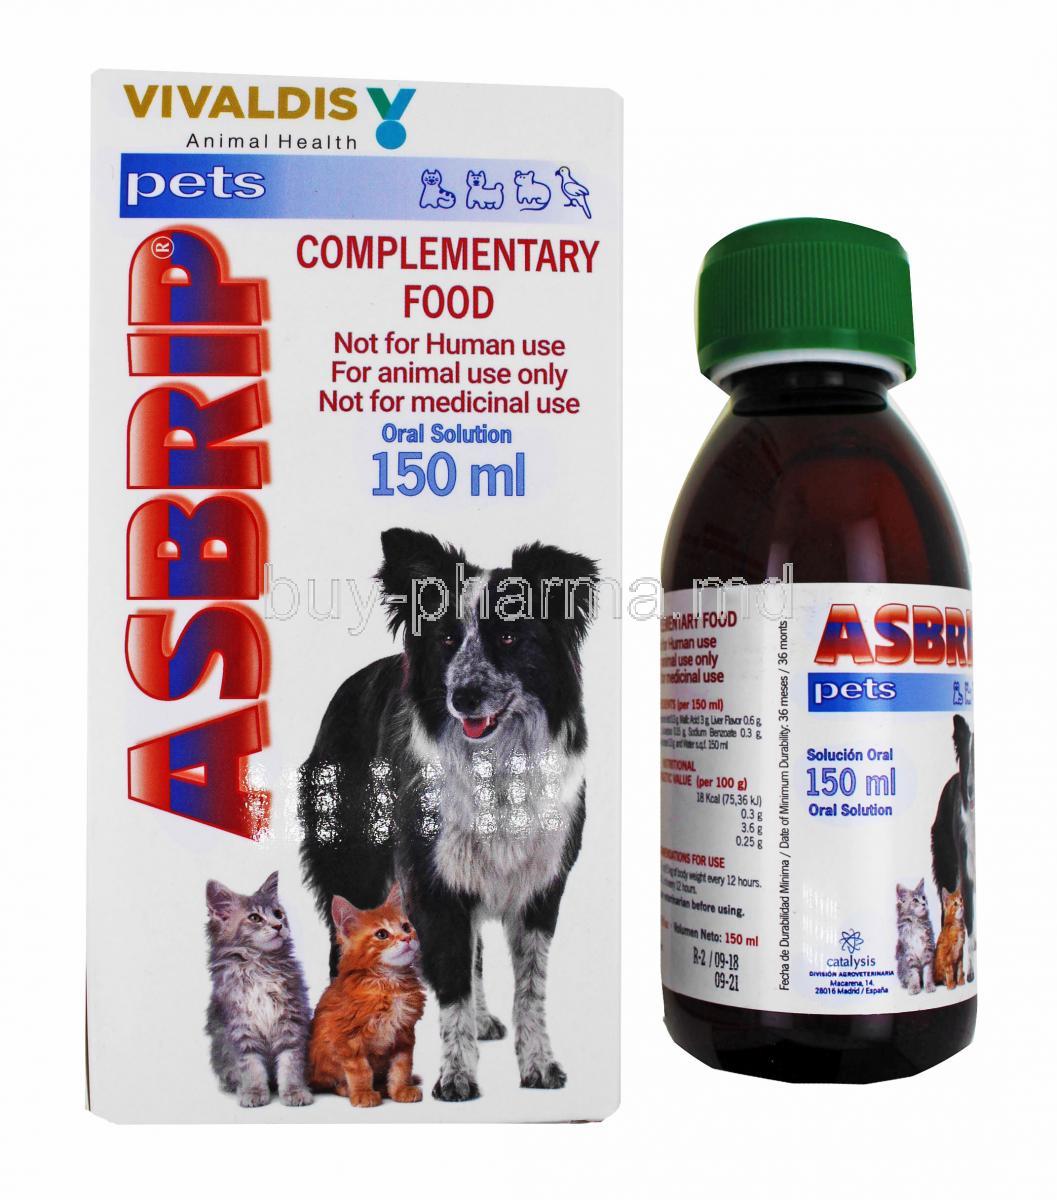 Asbrip Oral Solution for Pets, box and bottle